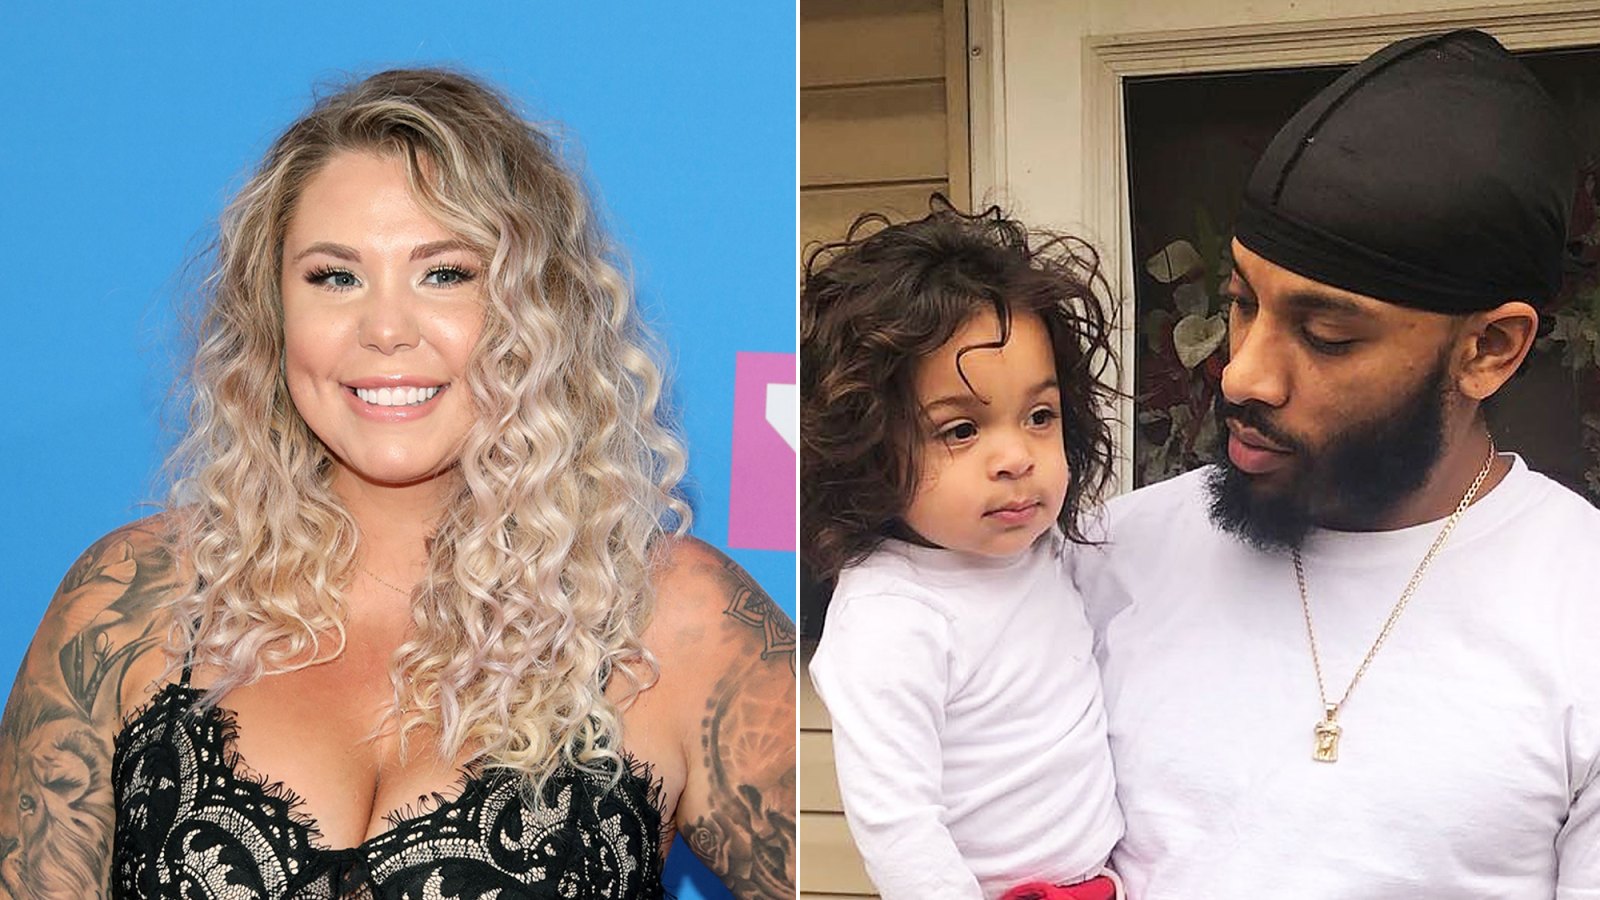 Kailyn Lowry's Ex Chris Lopez Arrested for Violating Prosecution Order